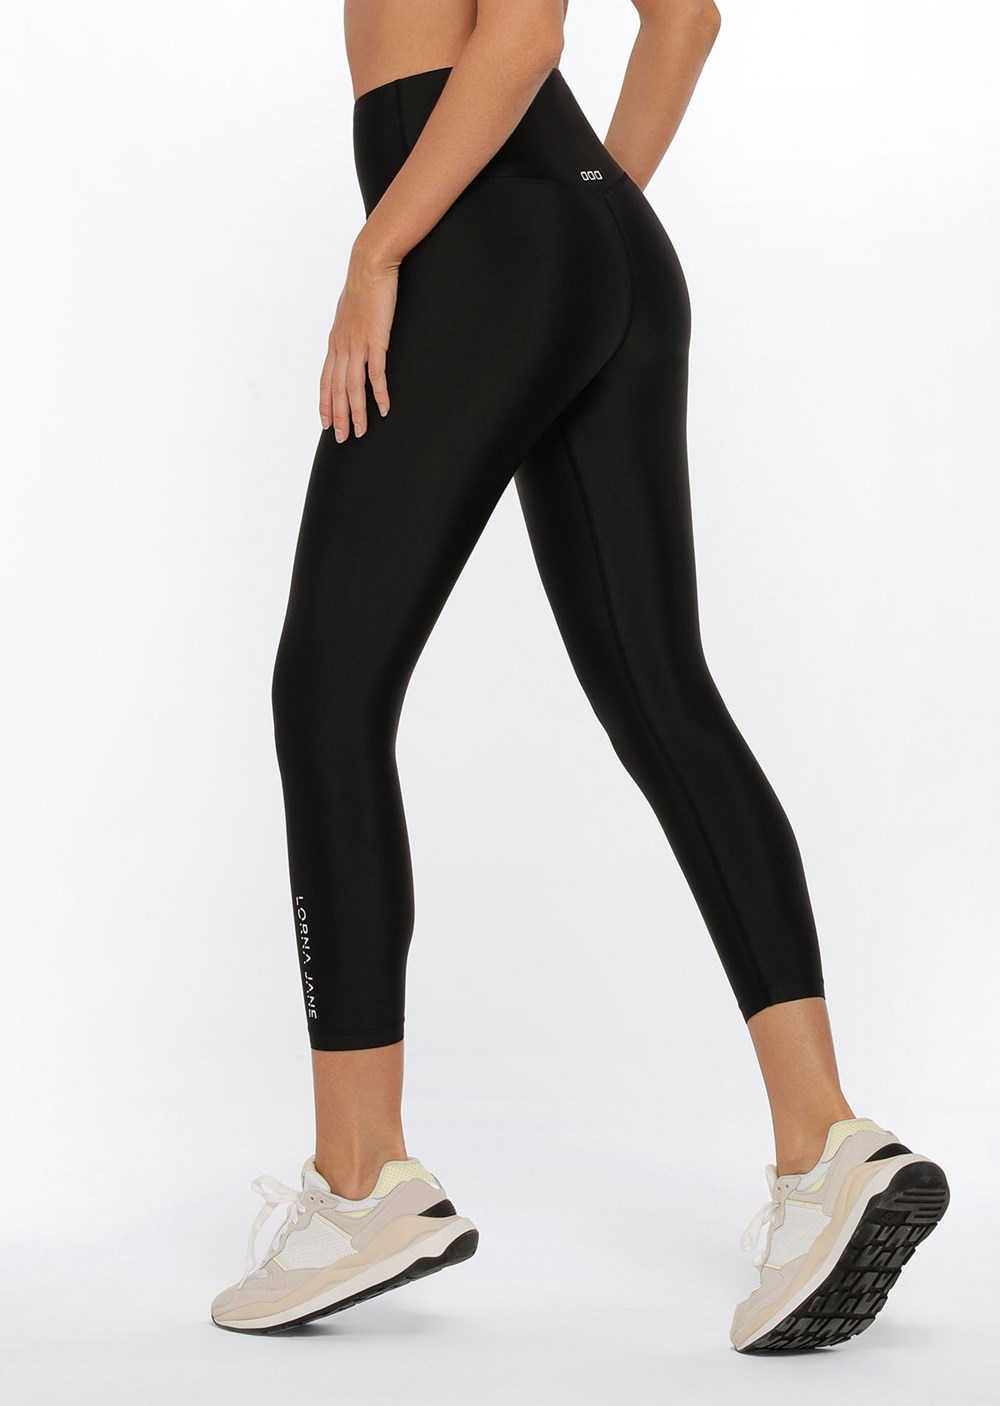 Buy Lorna Jane Leggings Online At Best Prices - Black Cool Touch